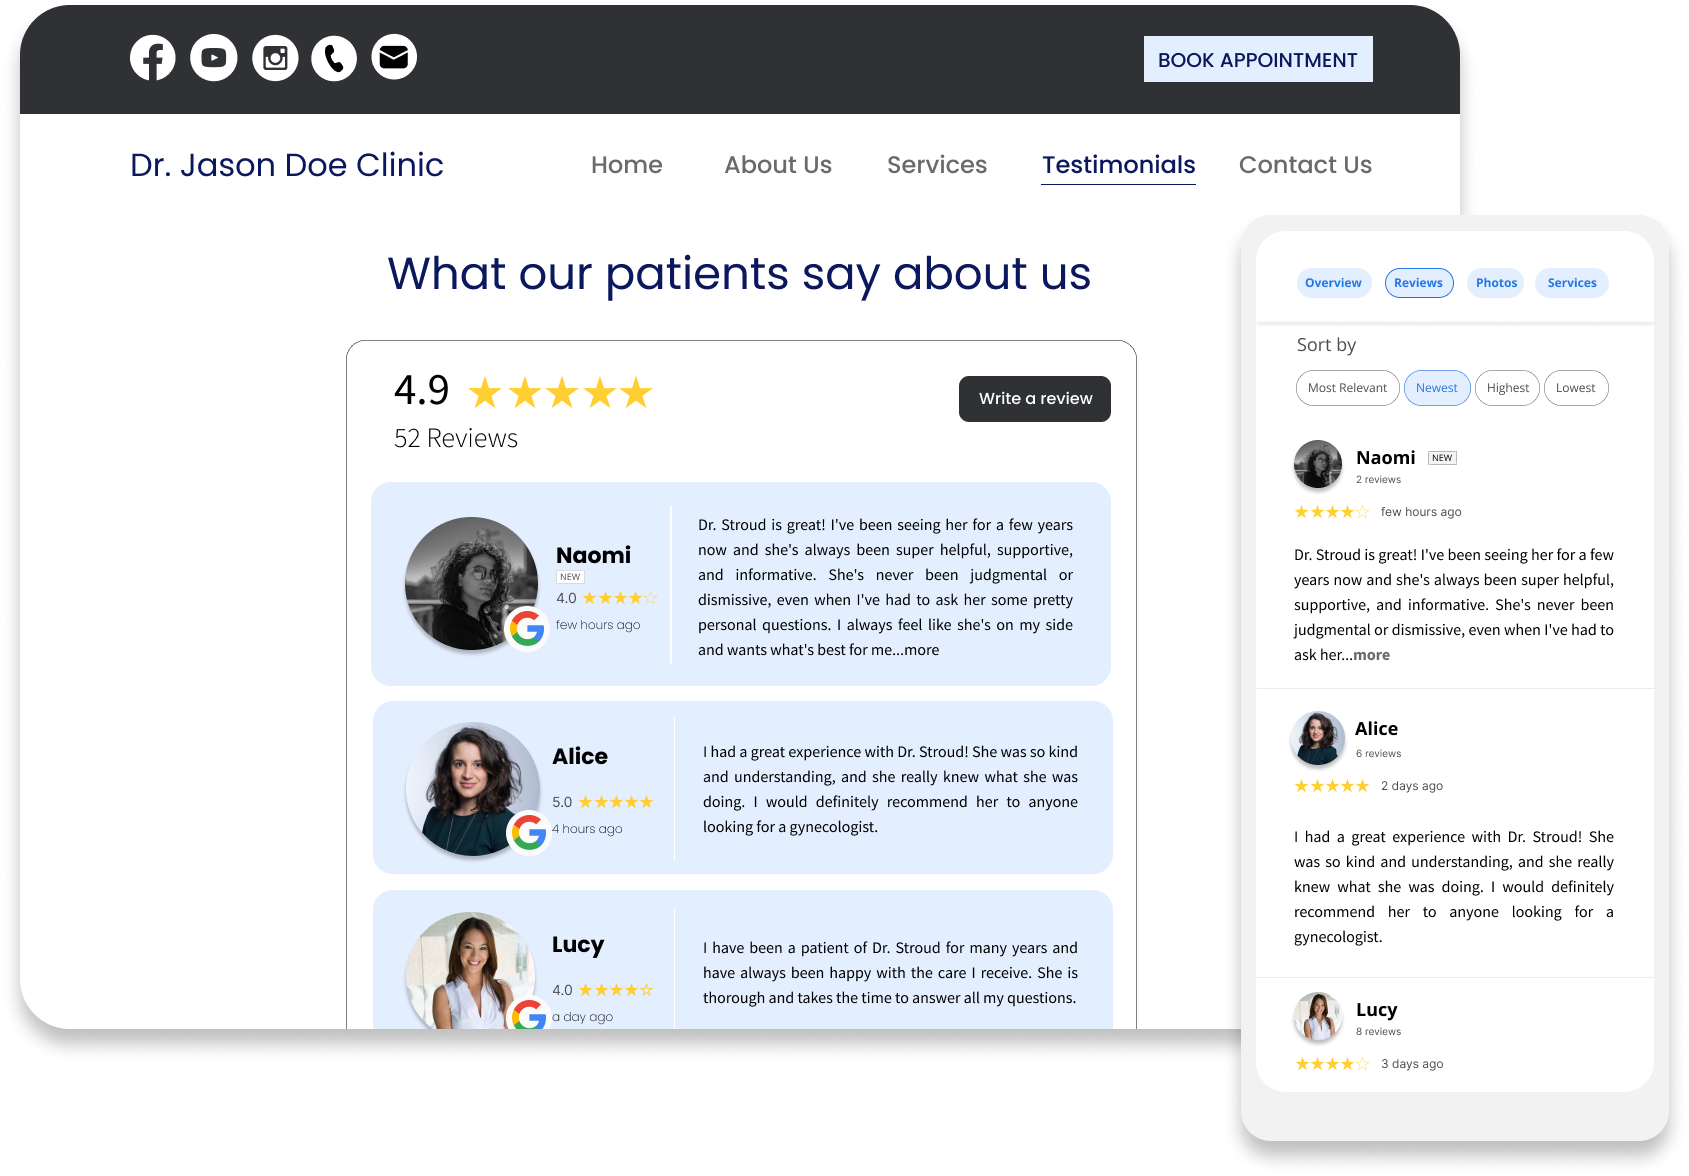 Showcase your stellar reviews on your website